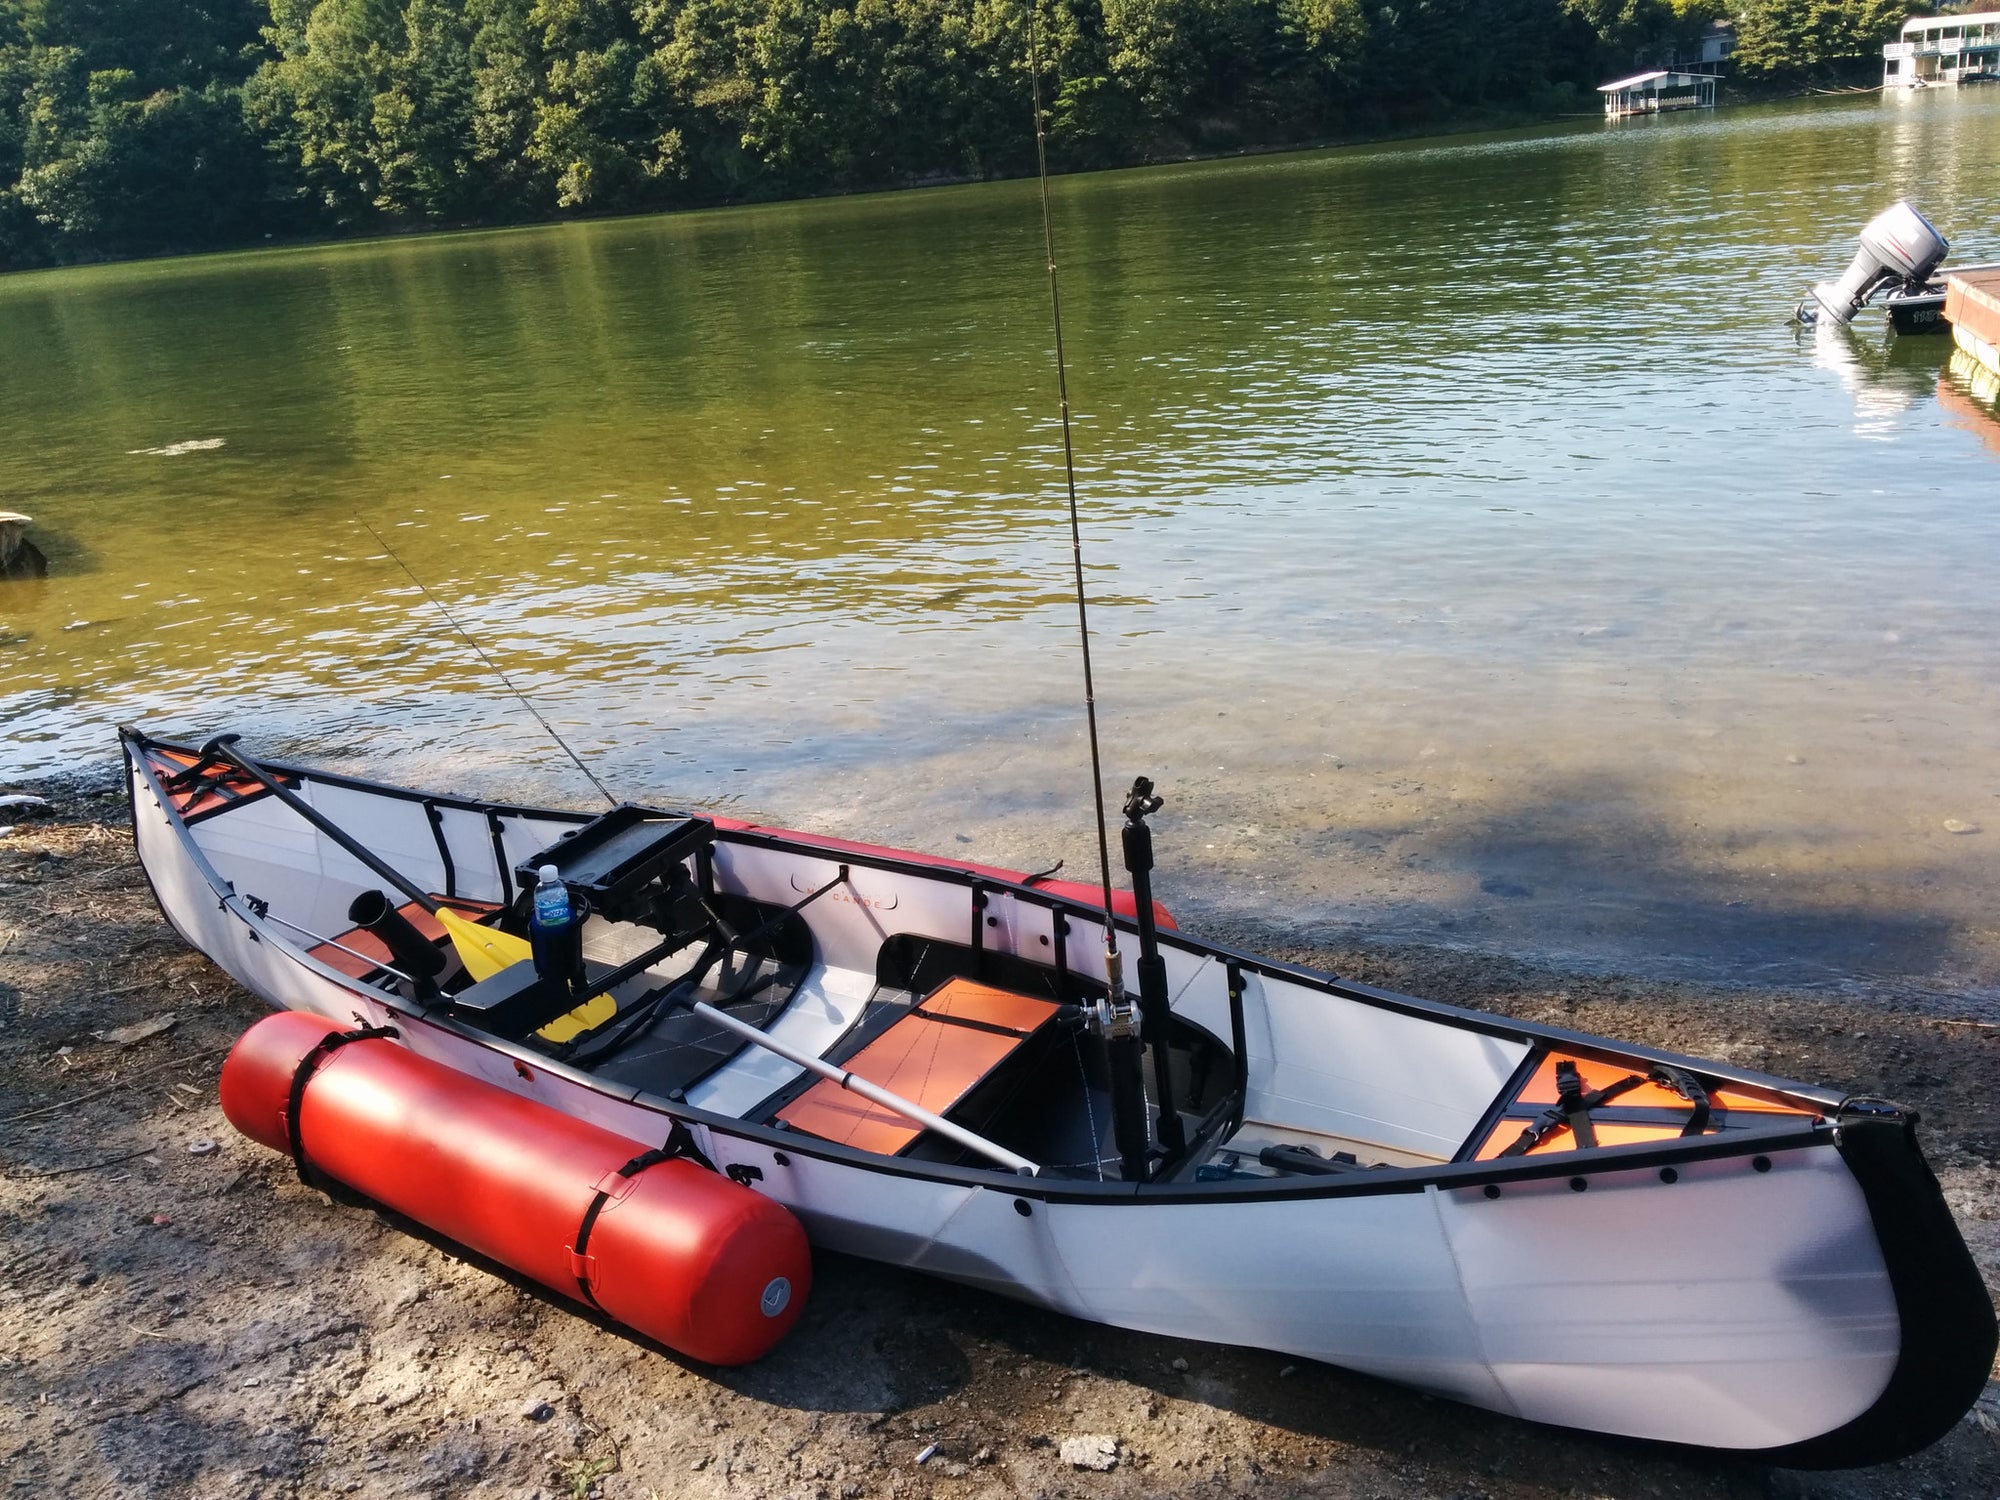 mycanoe duo folding 2-person canoe with red stabilizer